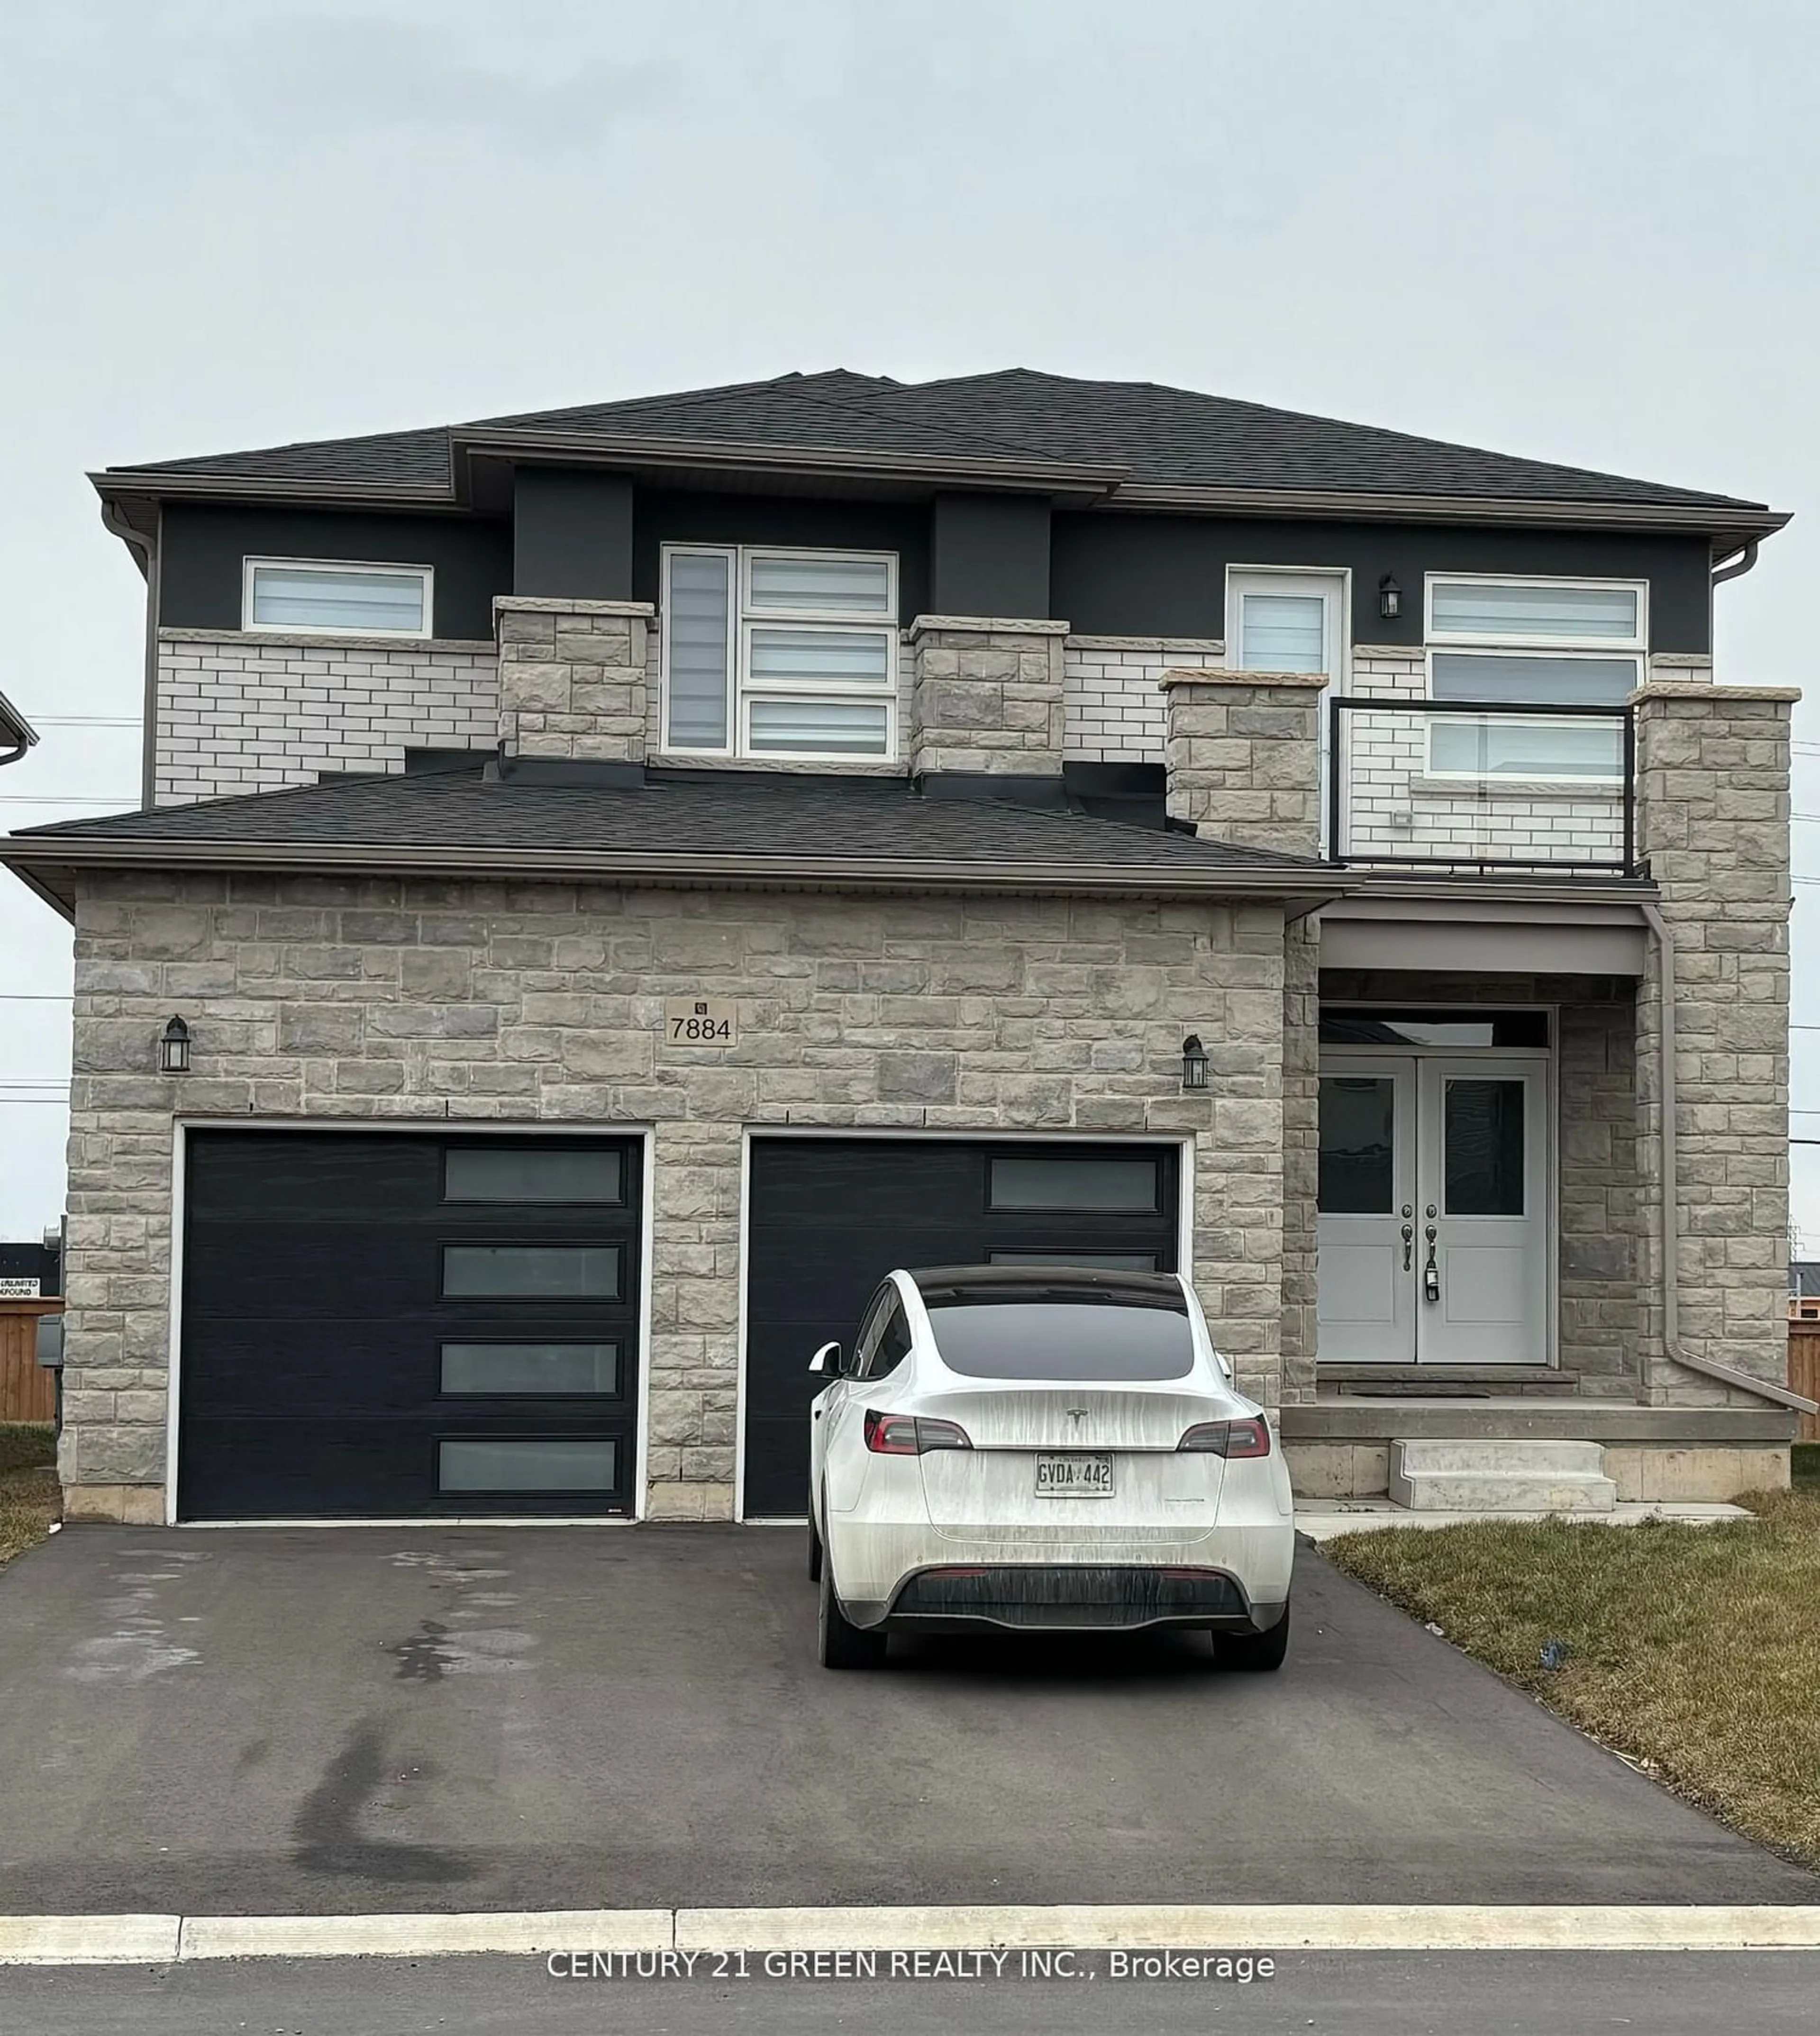 Home with brick exterior material for 7884 Seabiscuit Dr, Niagara Falls Ontario L2H 3T9